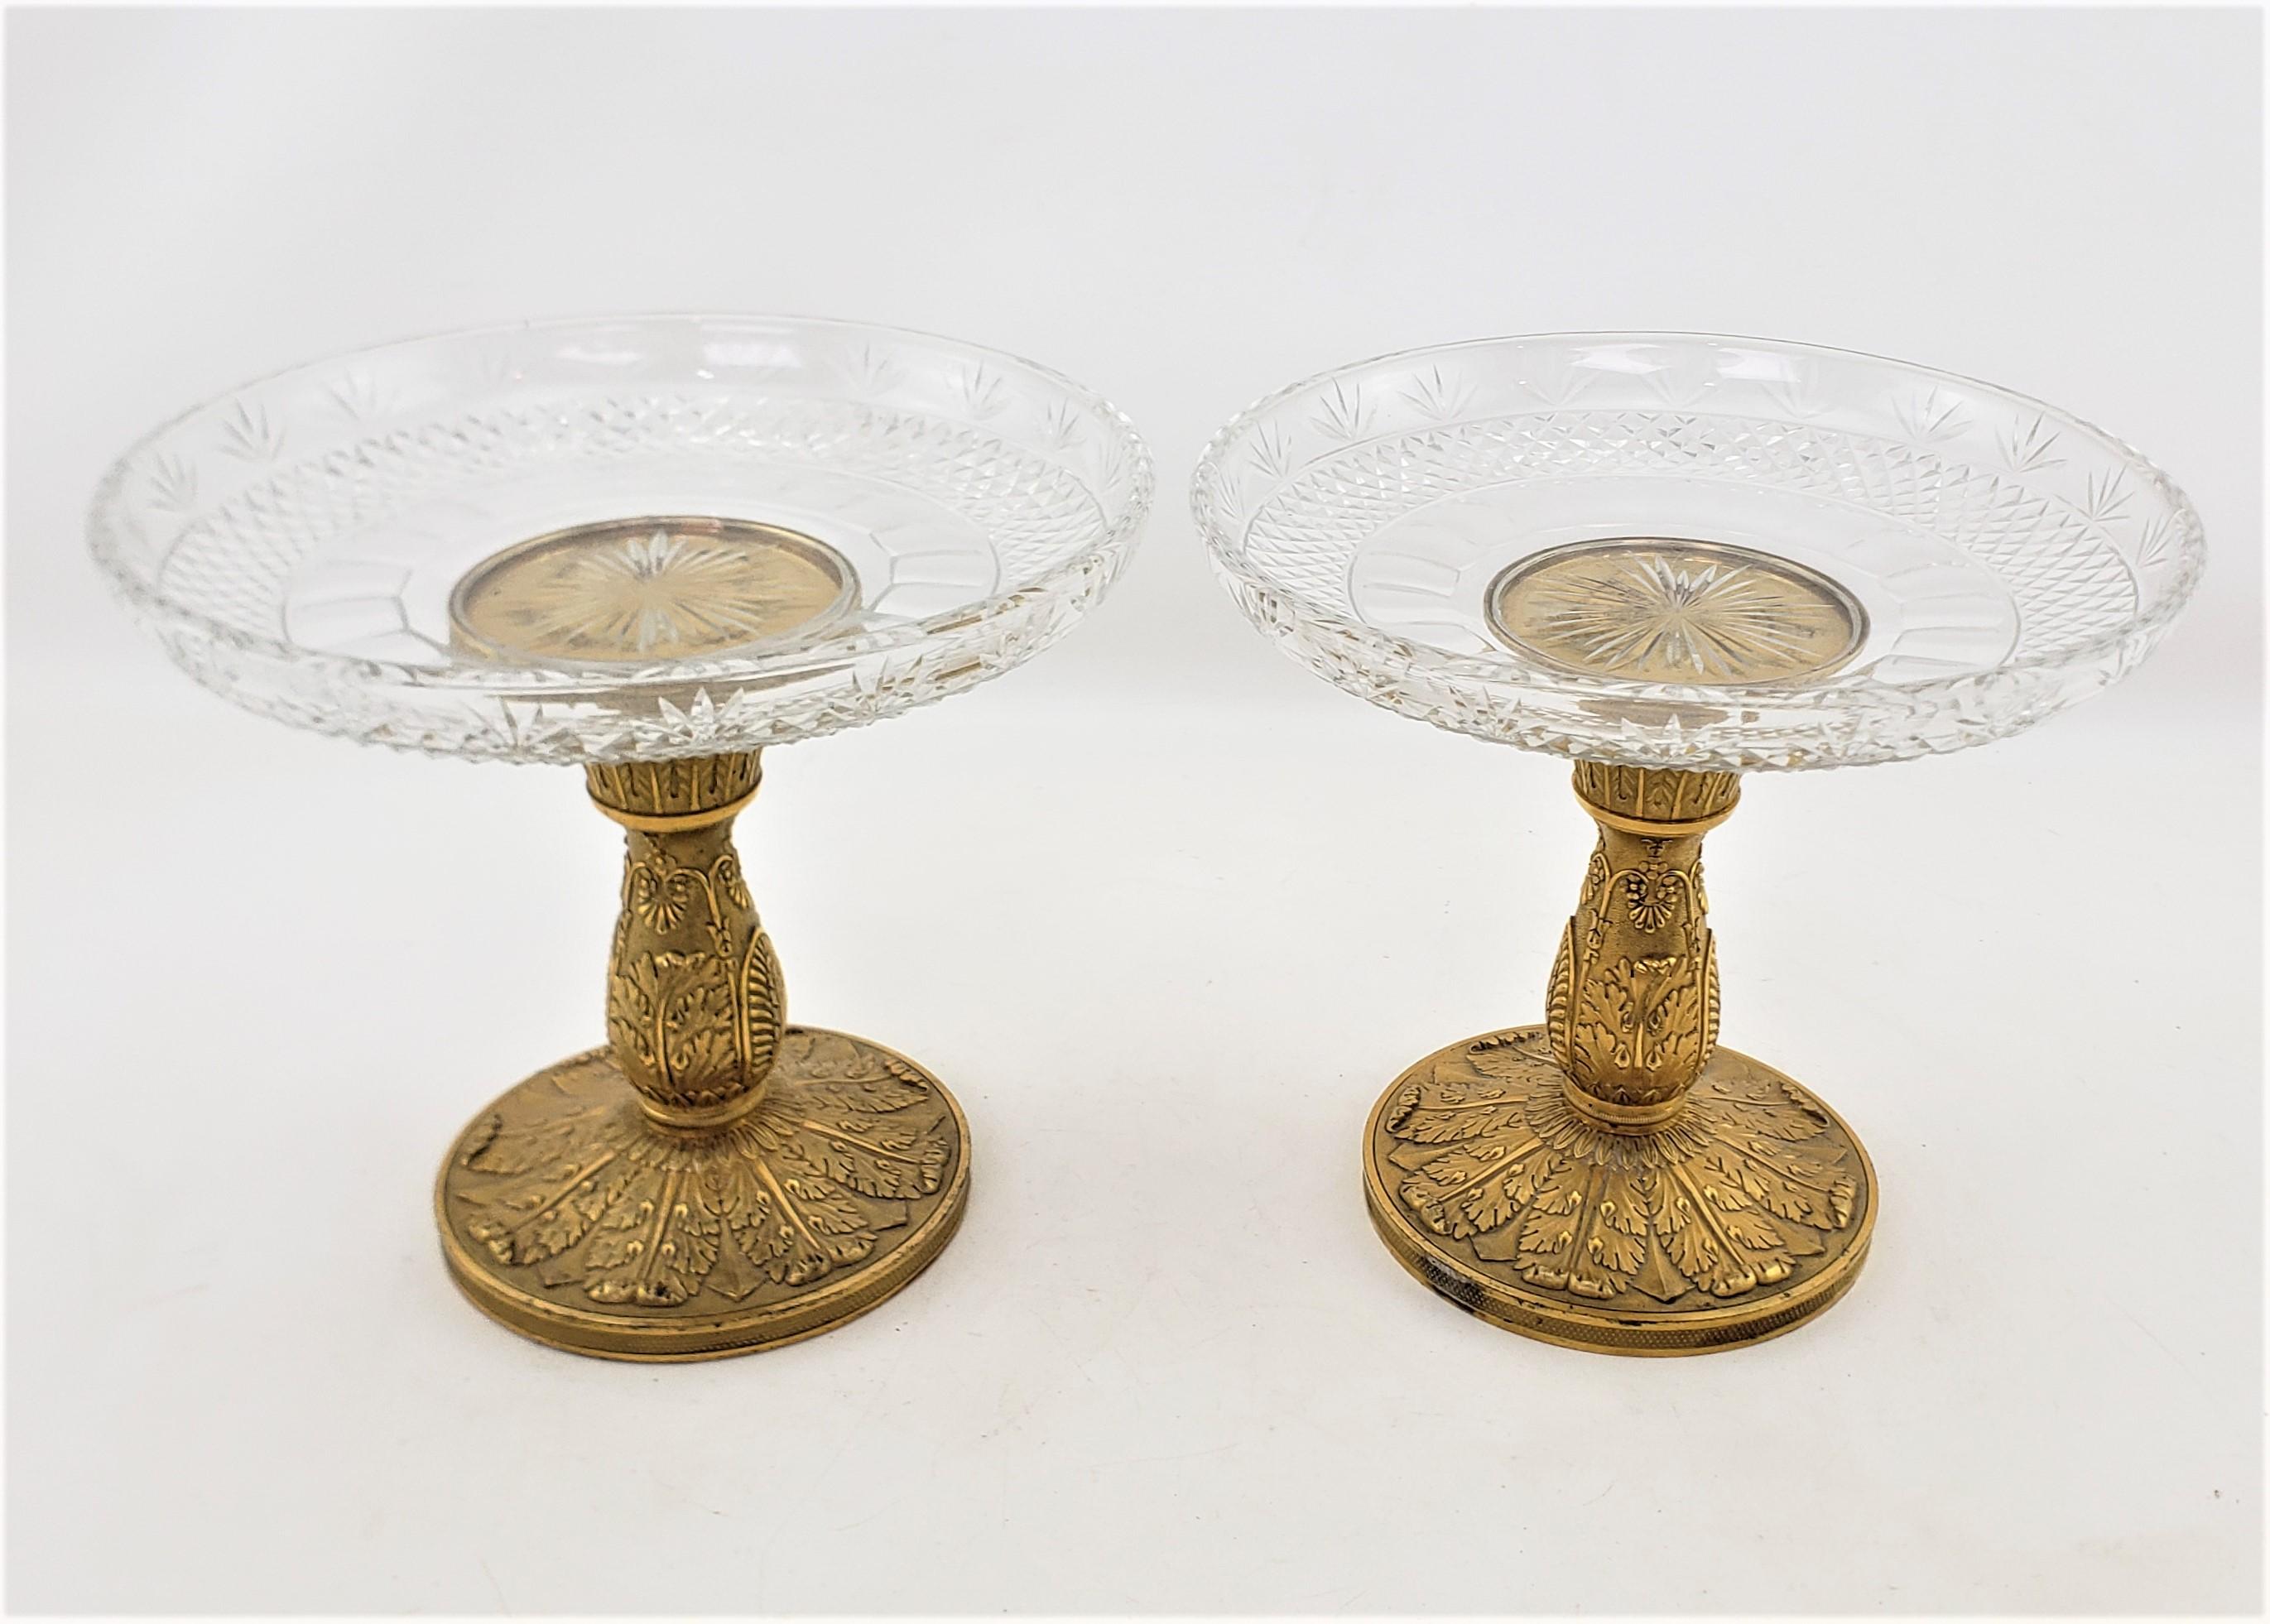 20th Century Pair of Antique Gilt Bronze & Crystal Tazzas or Pedestal Bowls For Sale